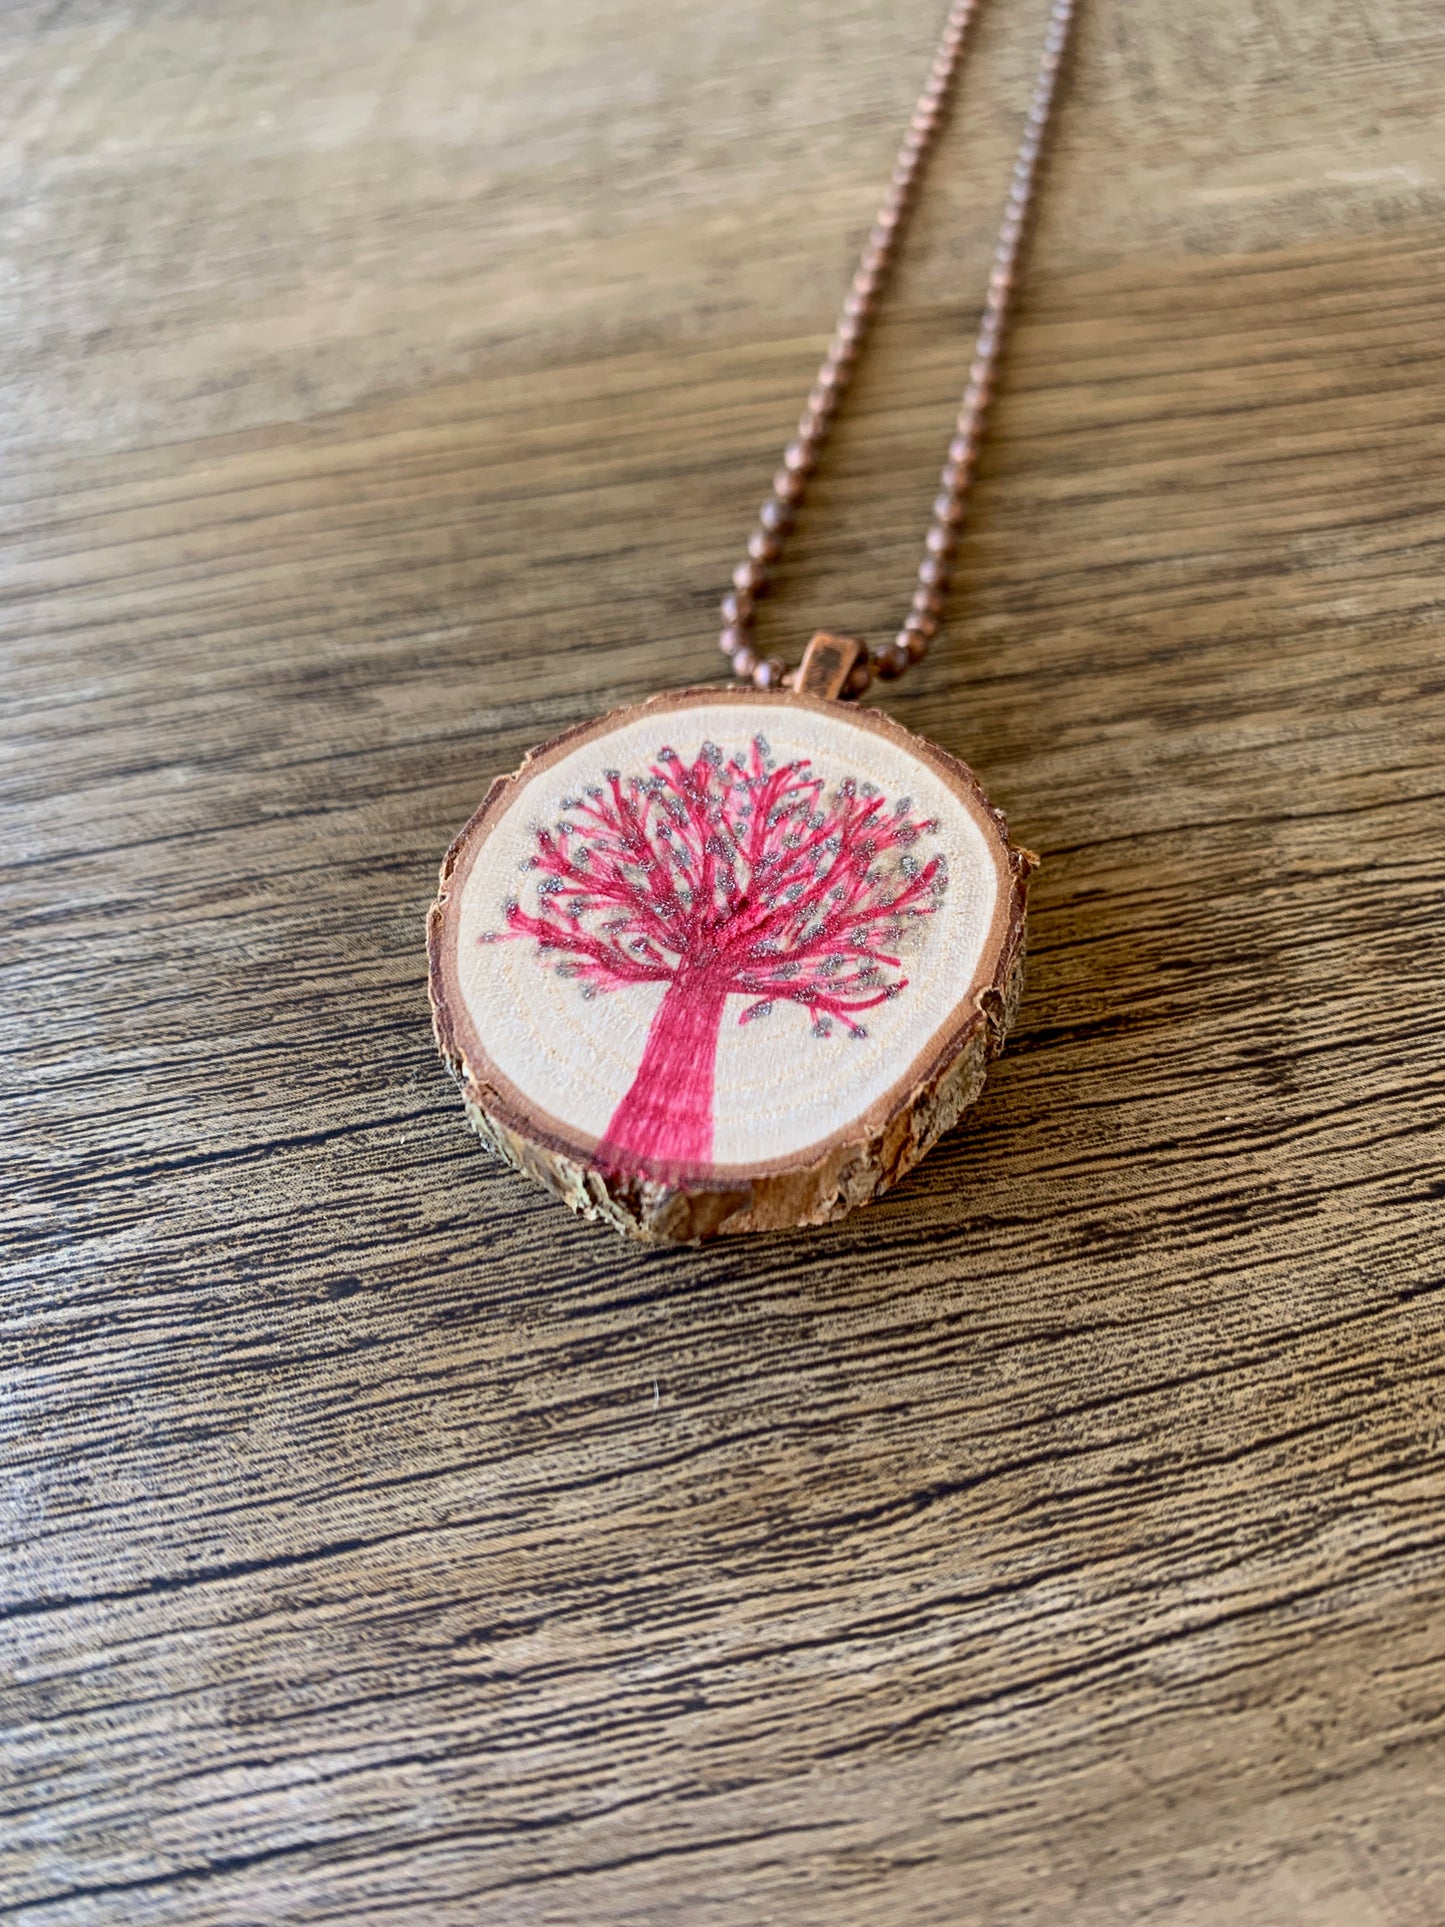 Enchanted Tree Pendant Pink and Silver